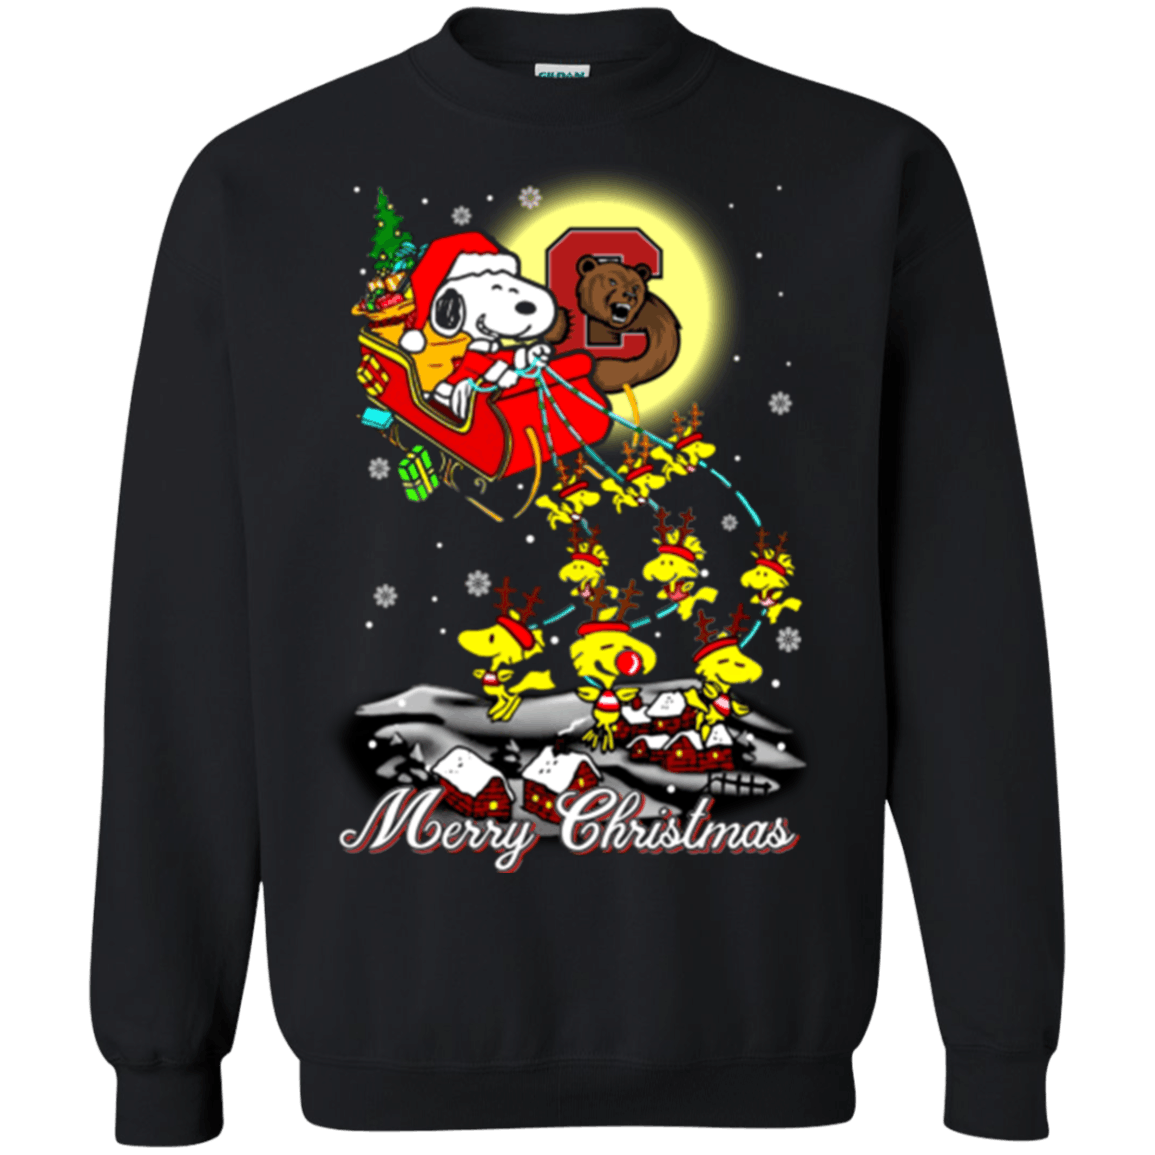 Awesome Cornell Big Red Snoopy Ugly Christmas Sweater 2023S Santa Claus With Sleigh Sweatshirts